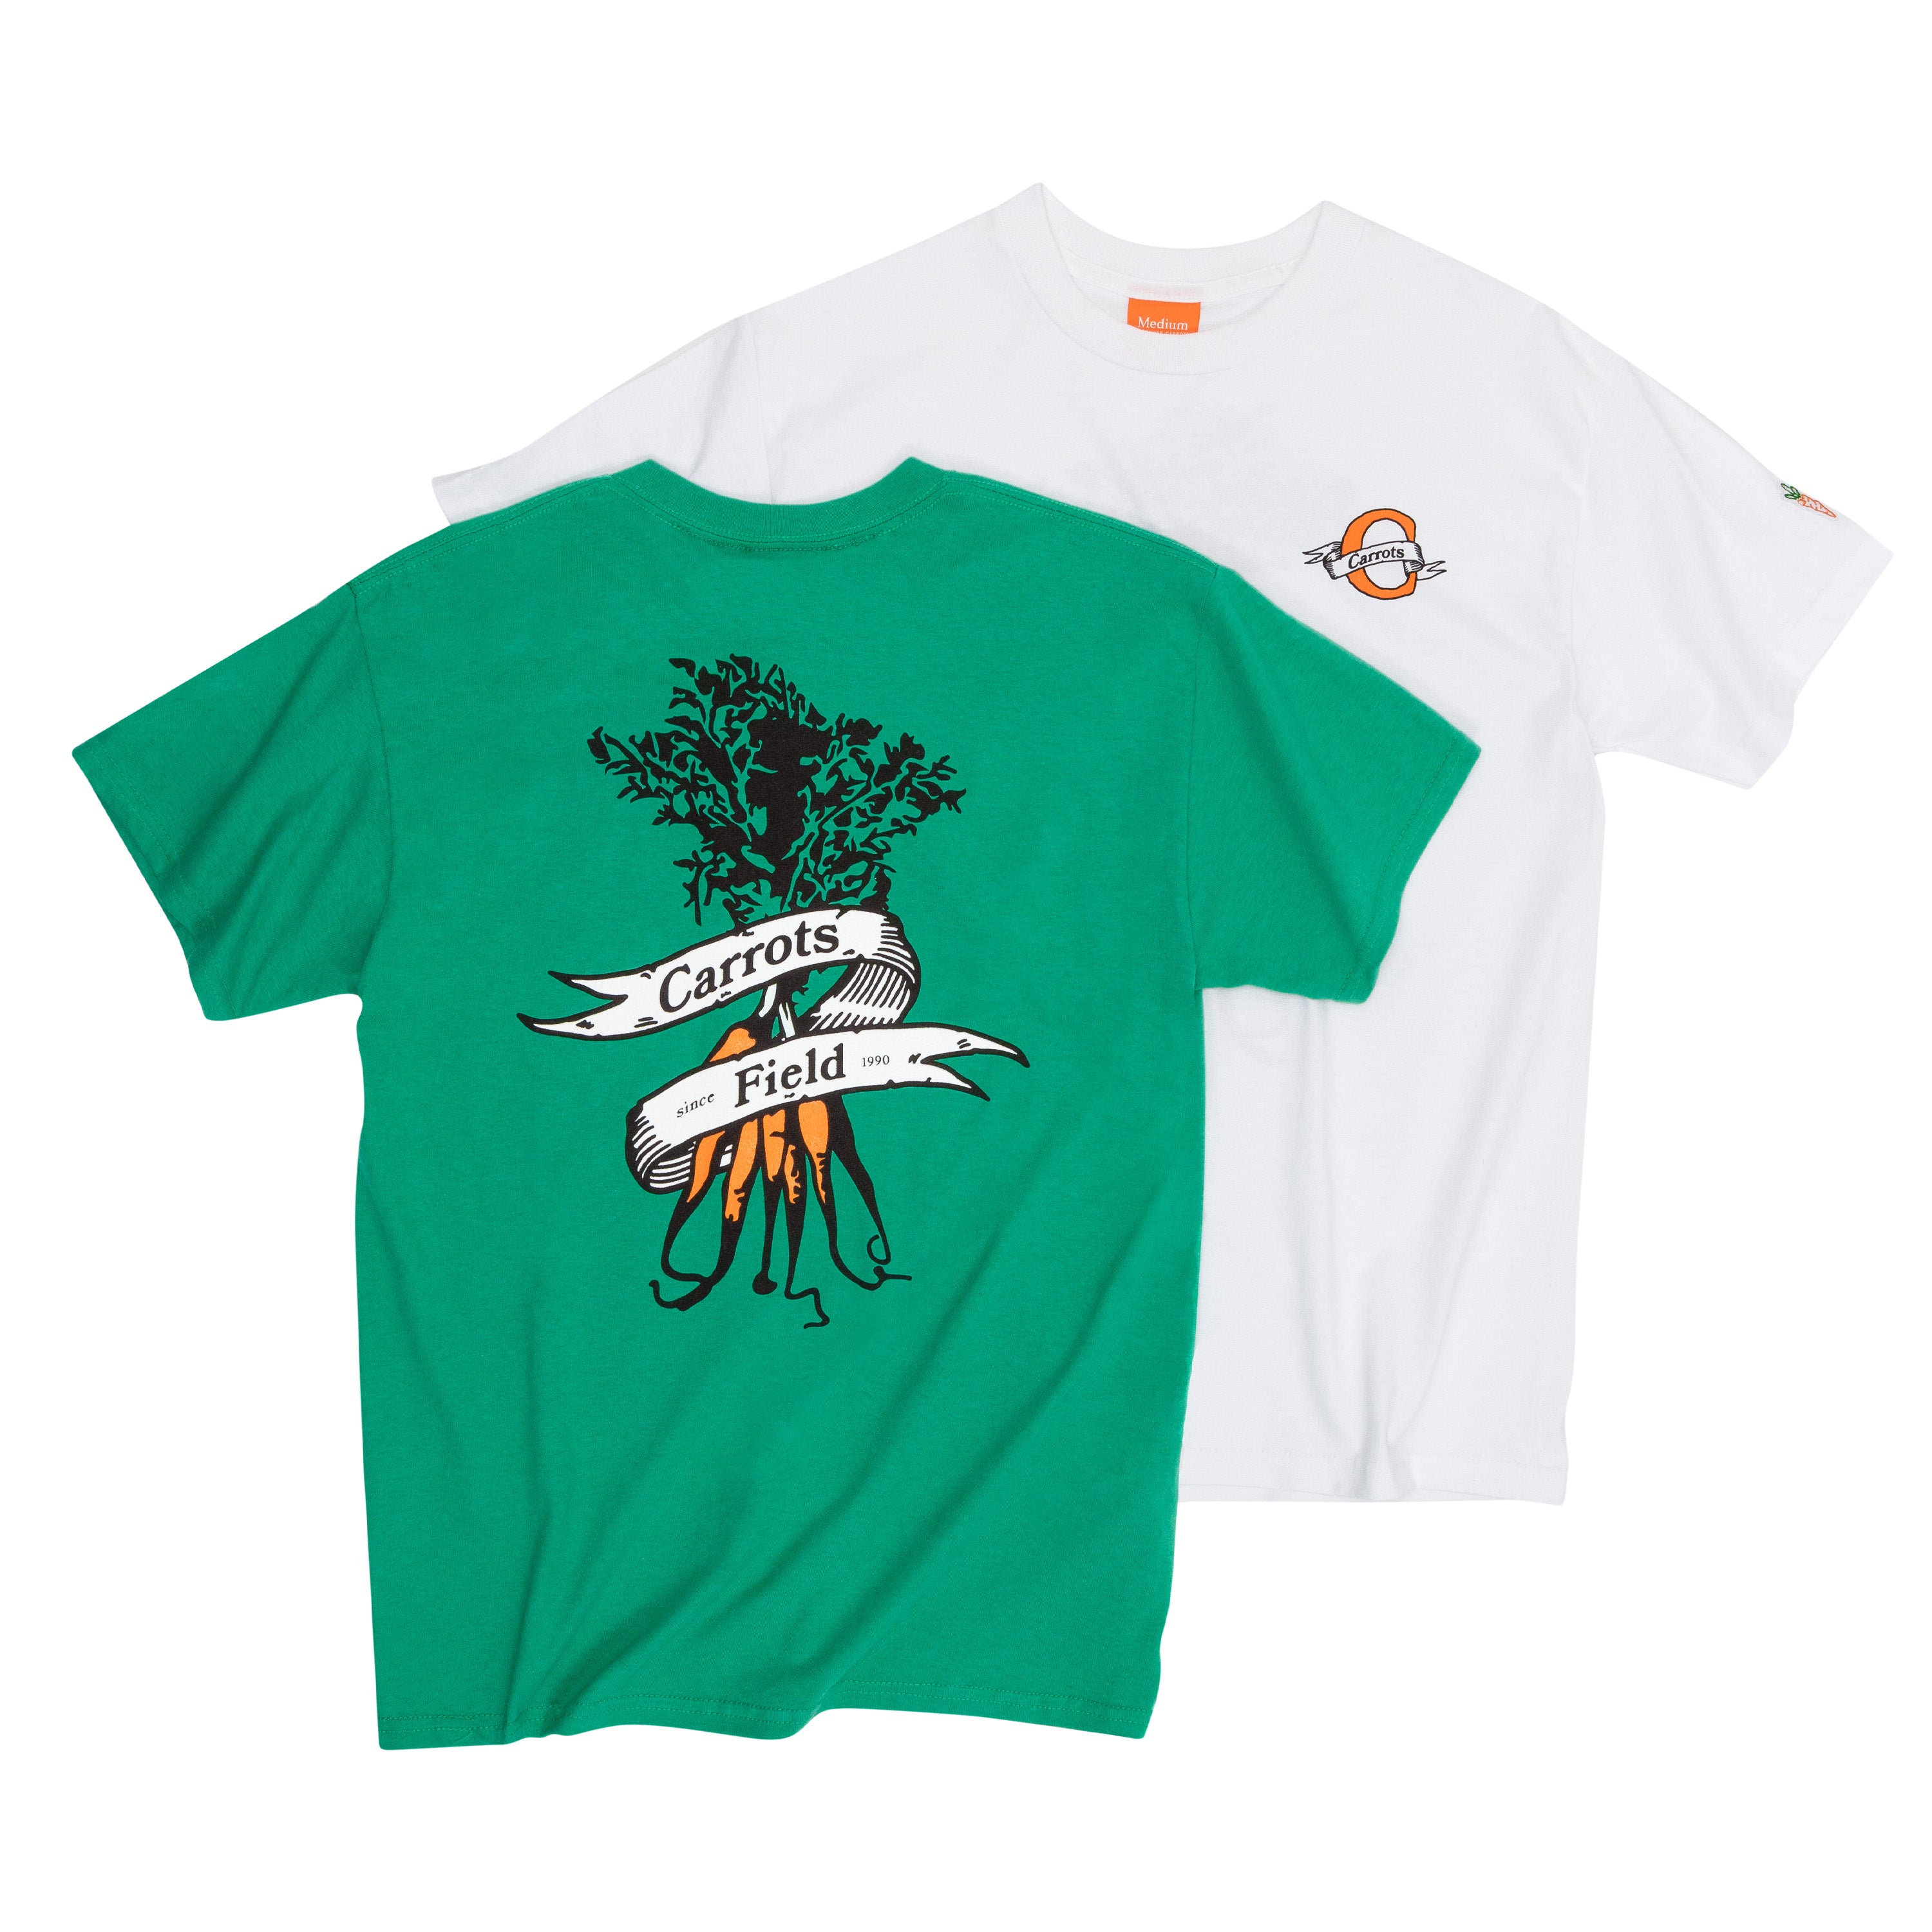 BANNER TEE - WHITE, HOLIDAY QS 23